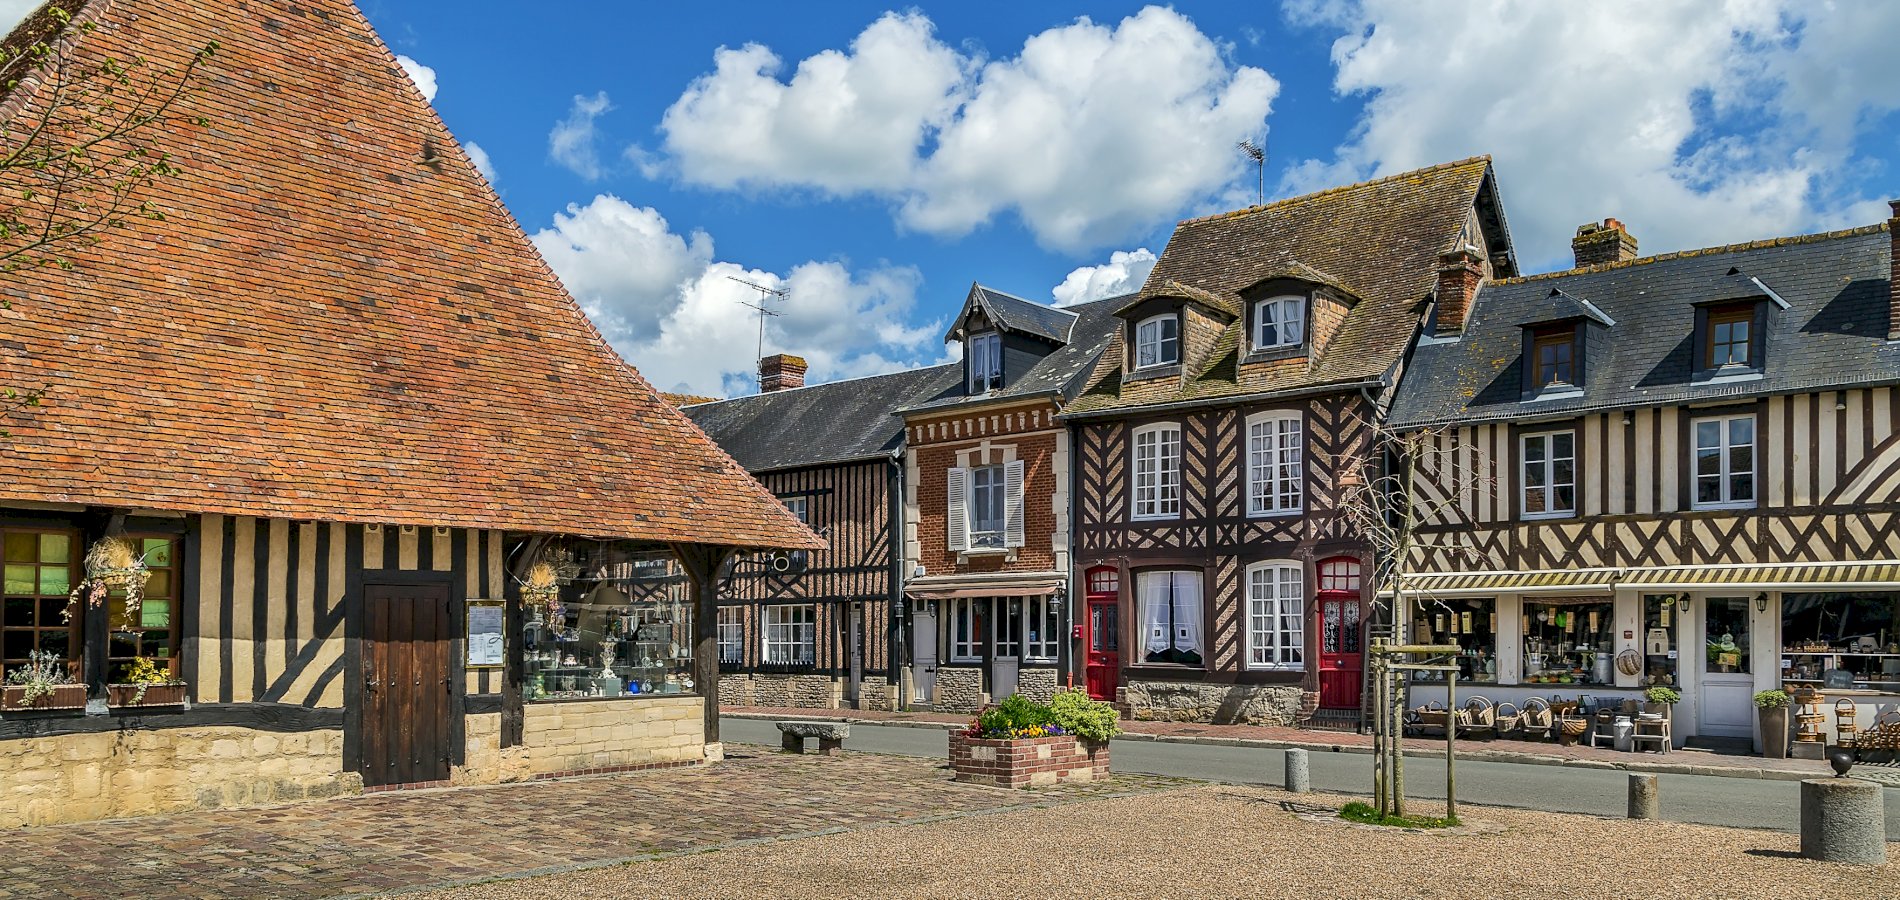 Ophorus Tours - From Bayeux to Honfleur, Beuvron & Calvados Tasting tour private